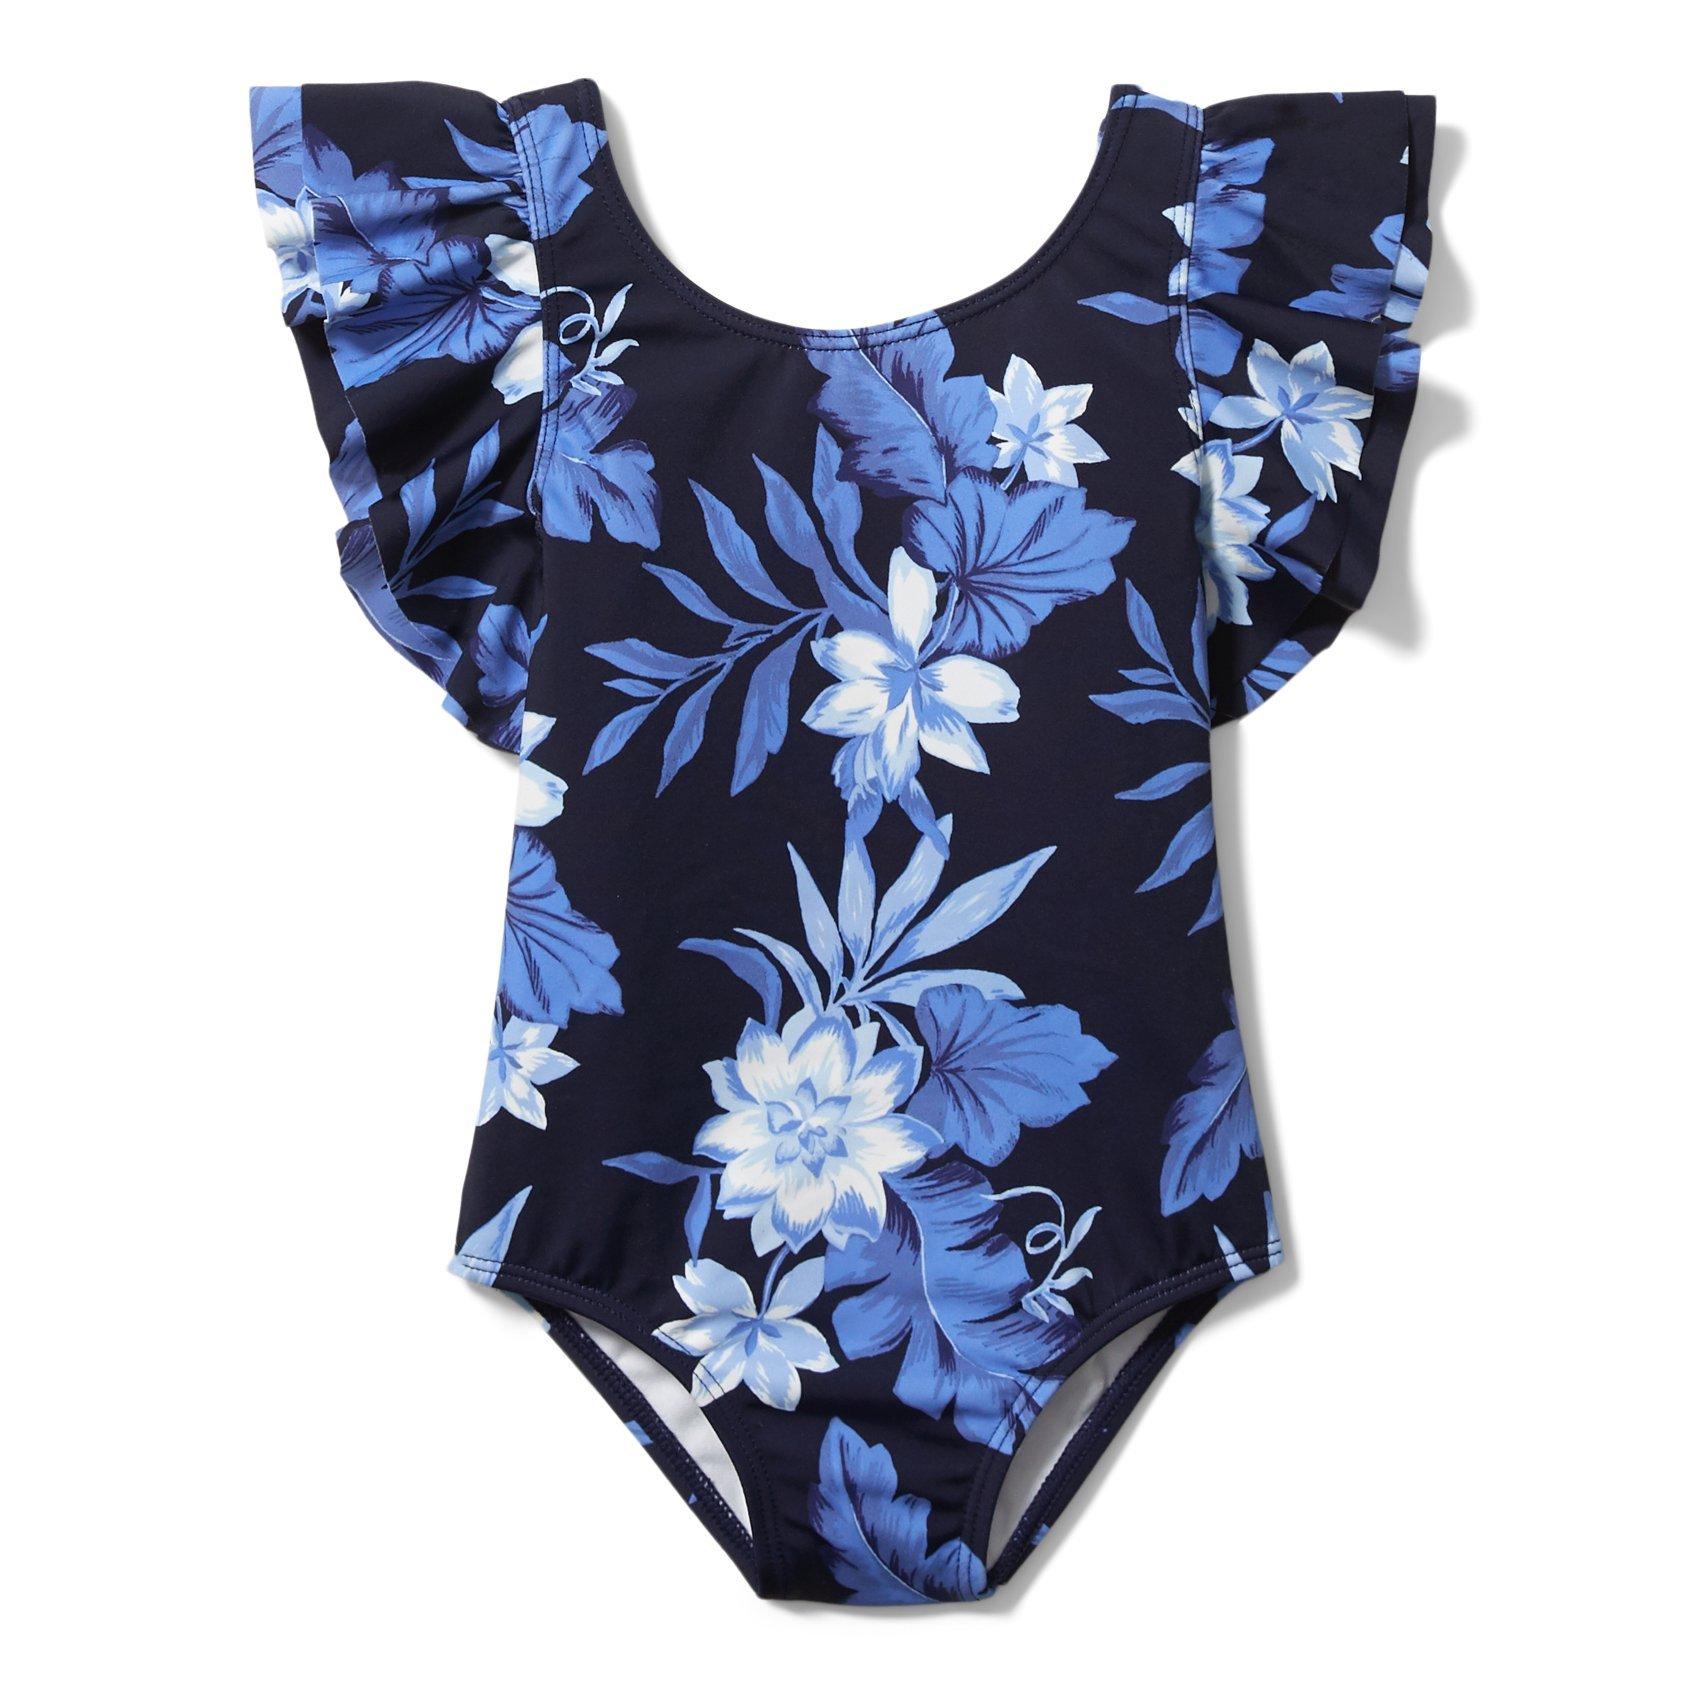 girl and boy matching swimsuits, blue and black floral ruffle sleeve one piece